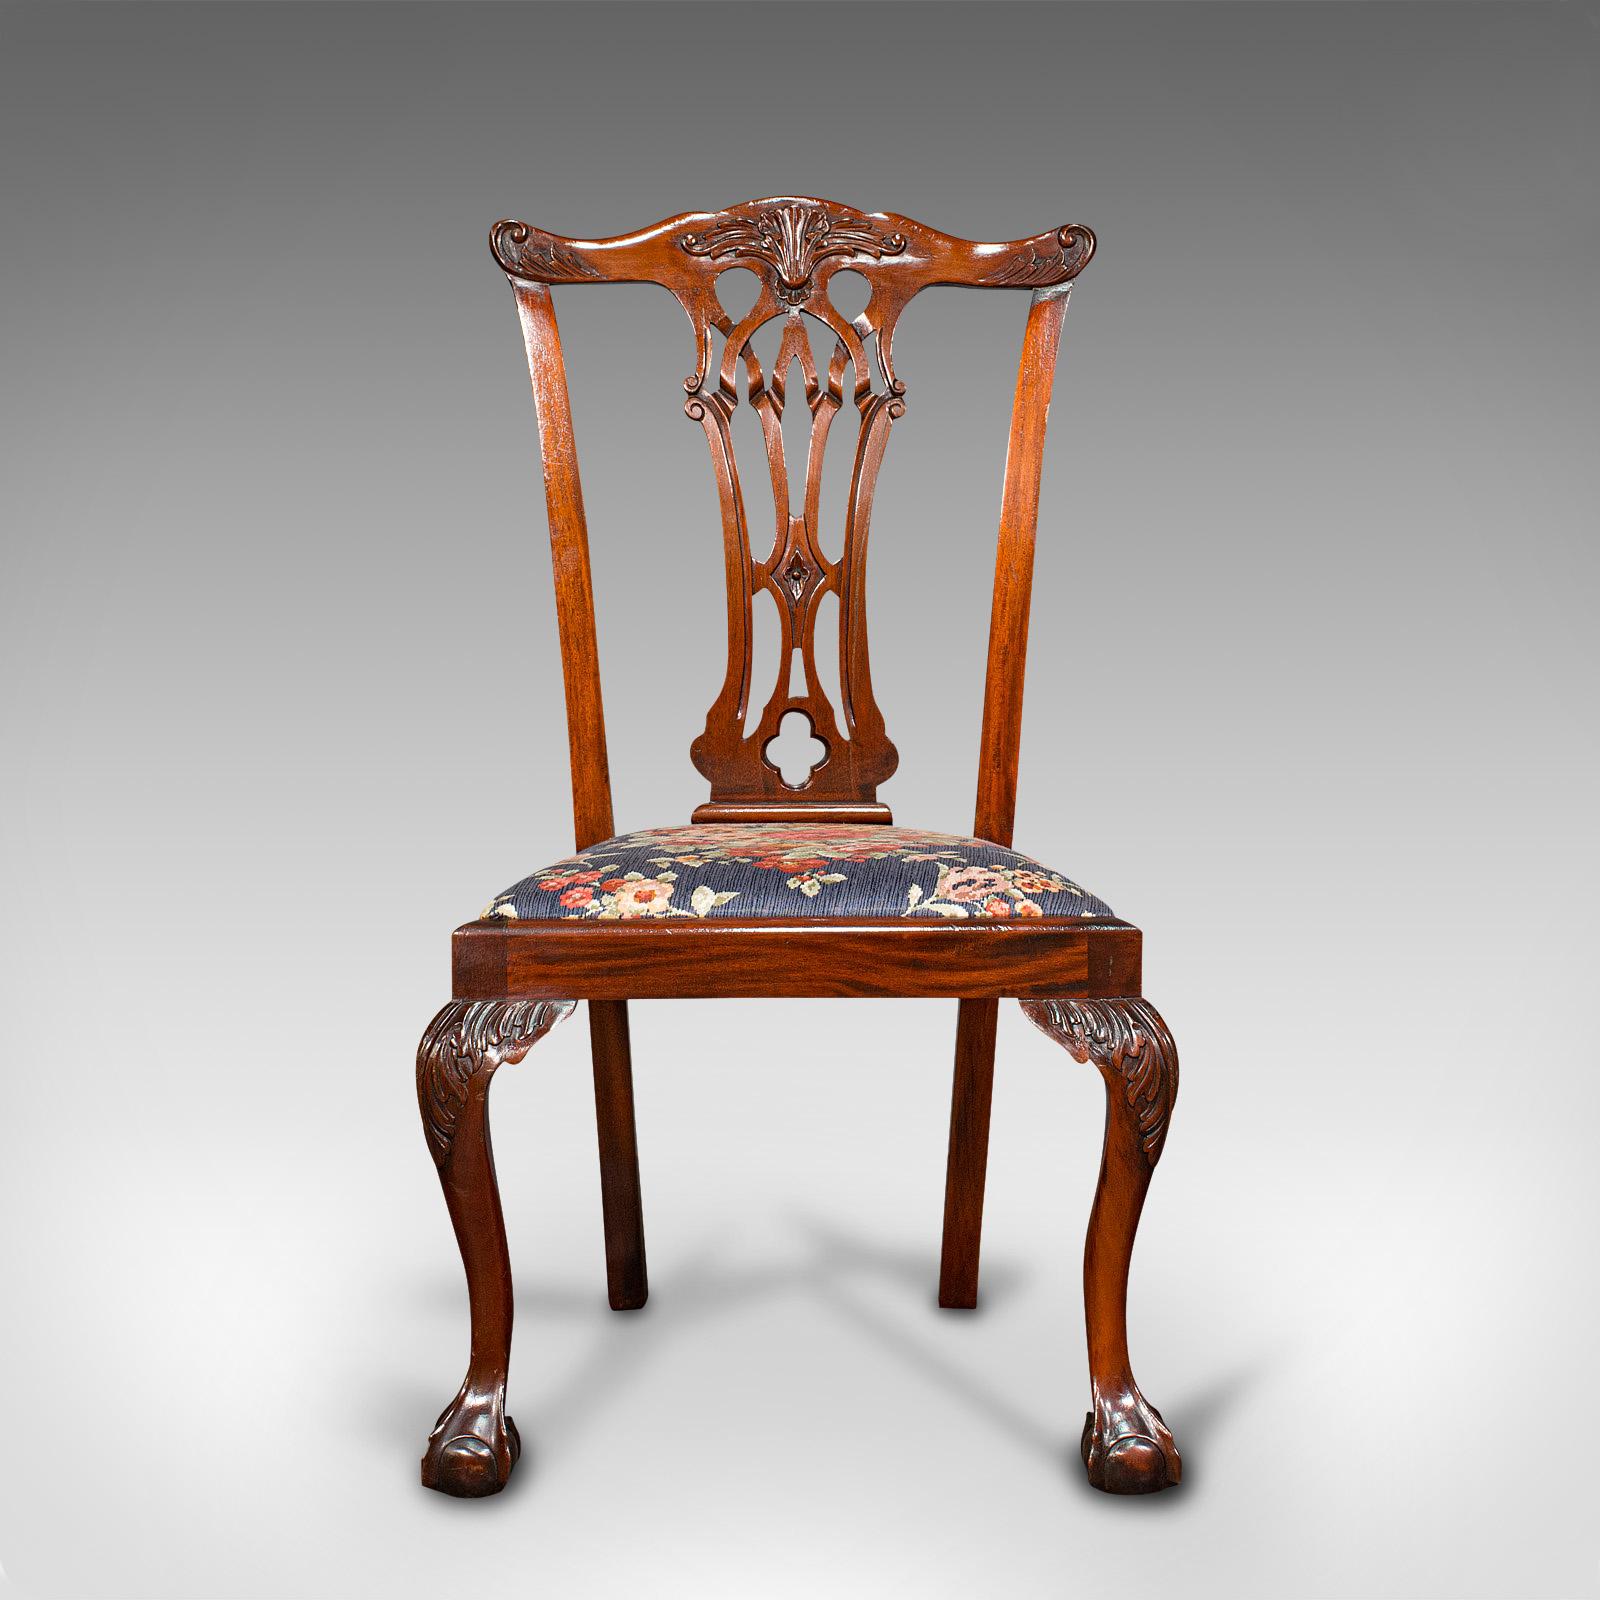 British 4 Antique Dining Chairs, English, Mahogany, Seat, After Chippendale, Victorian